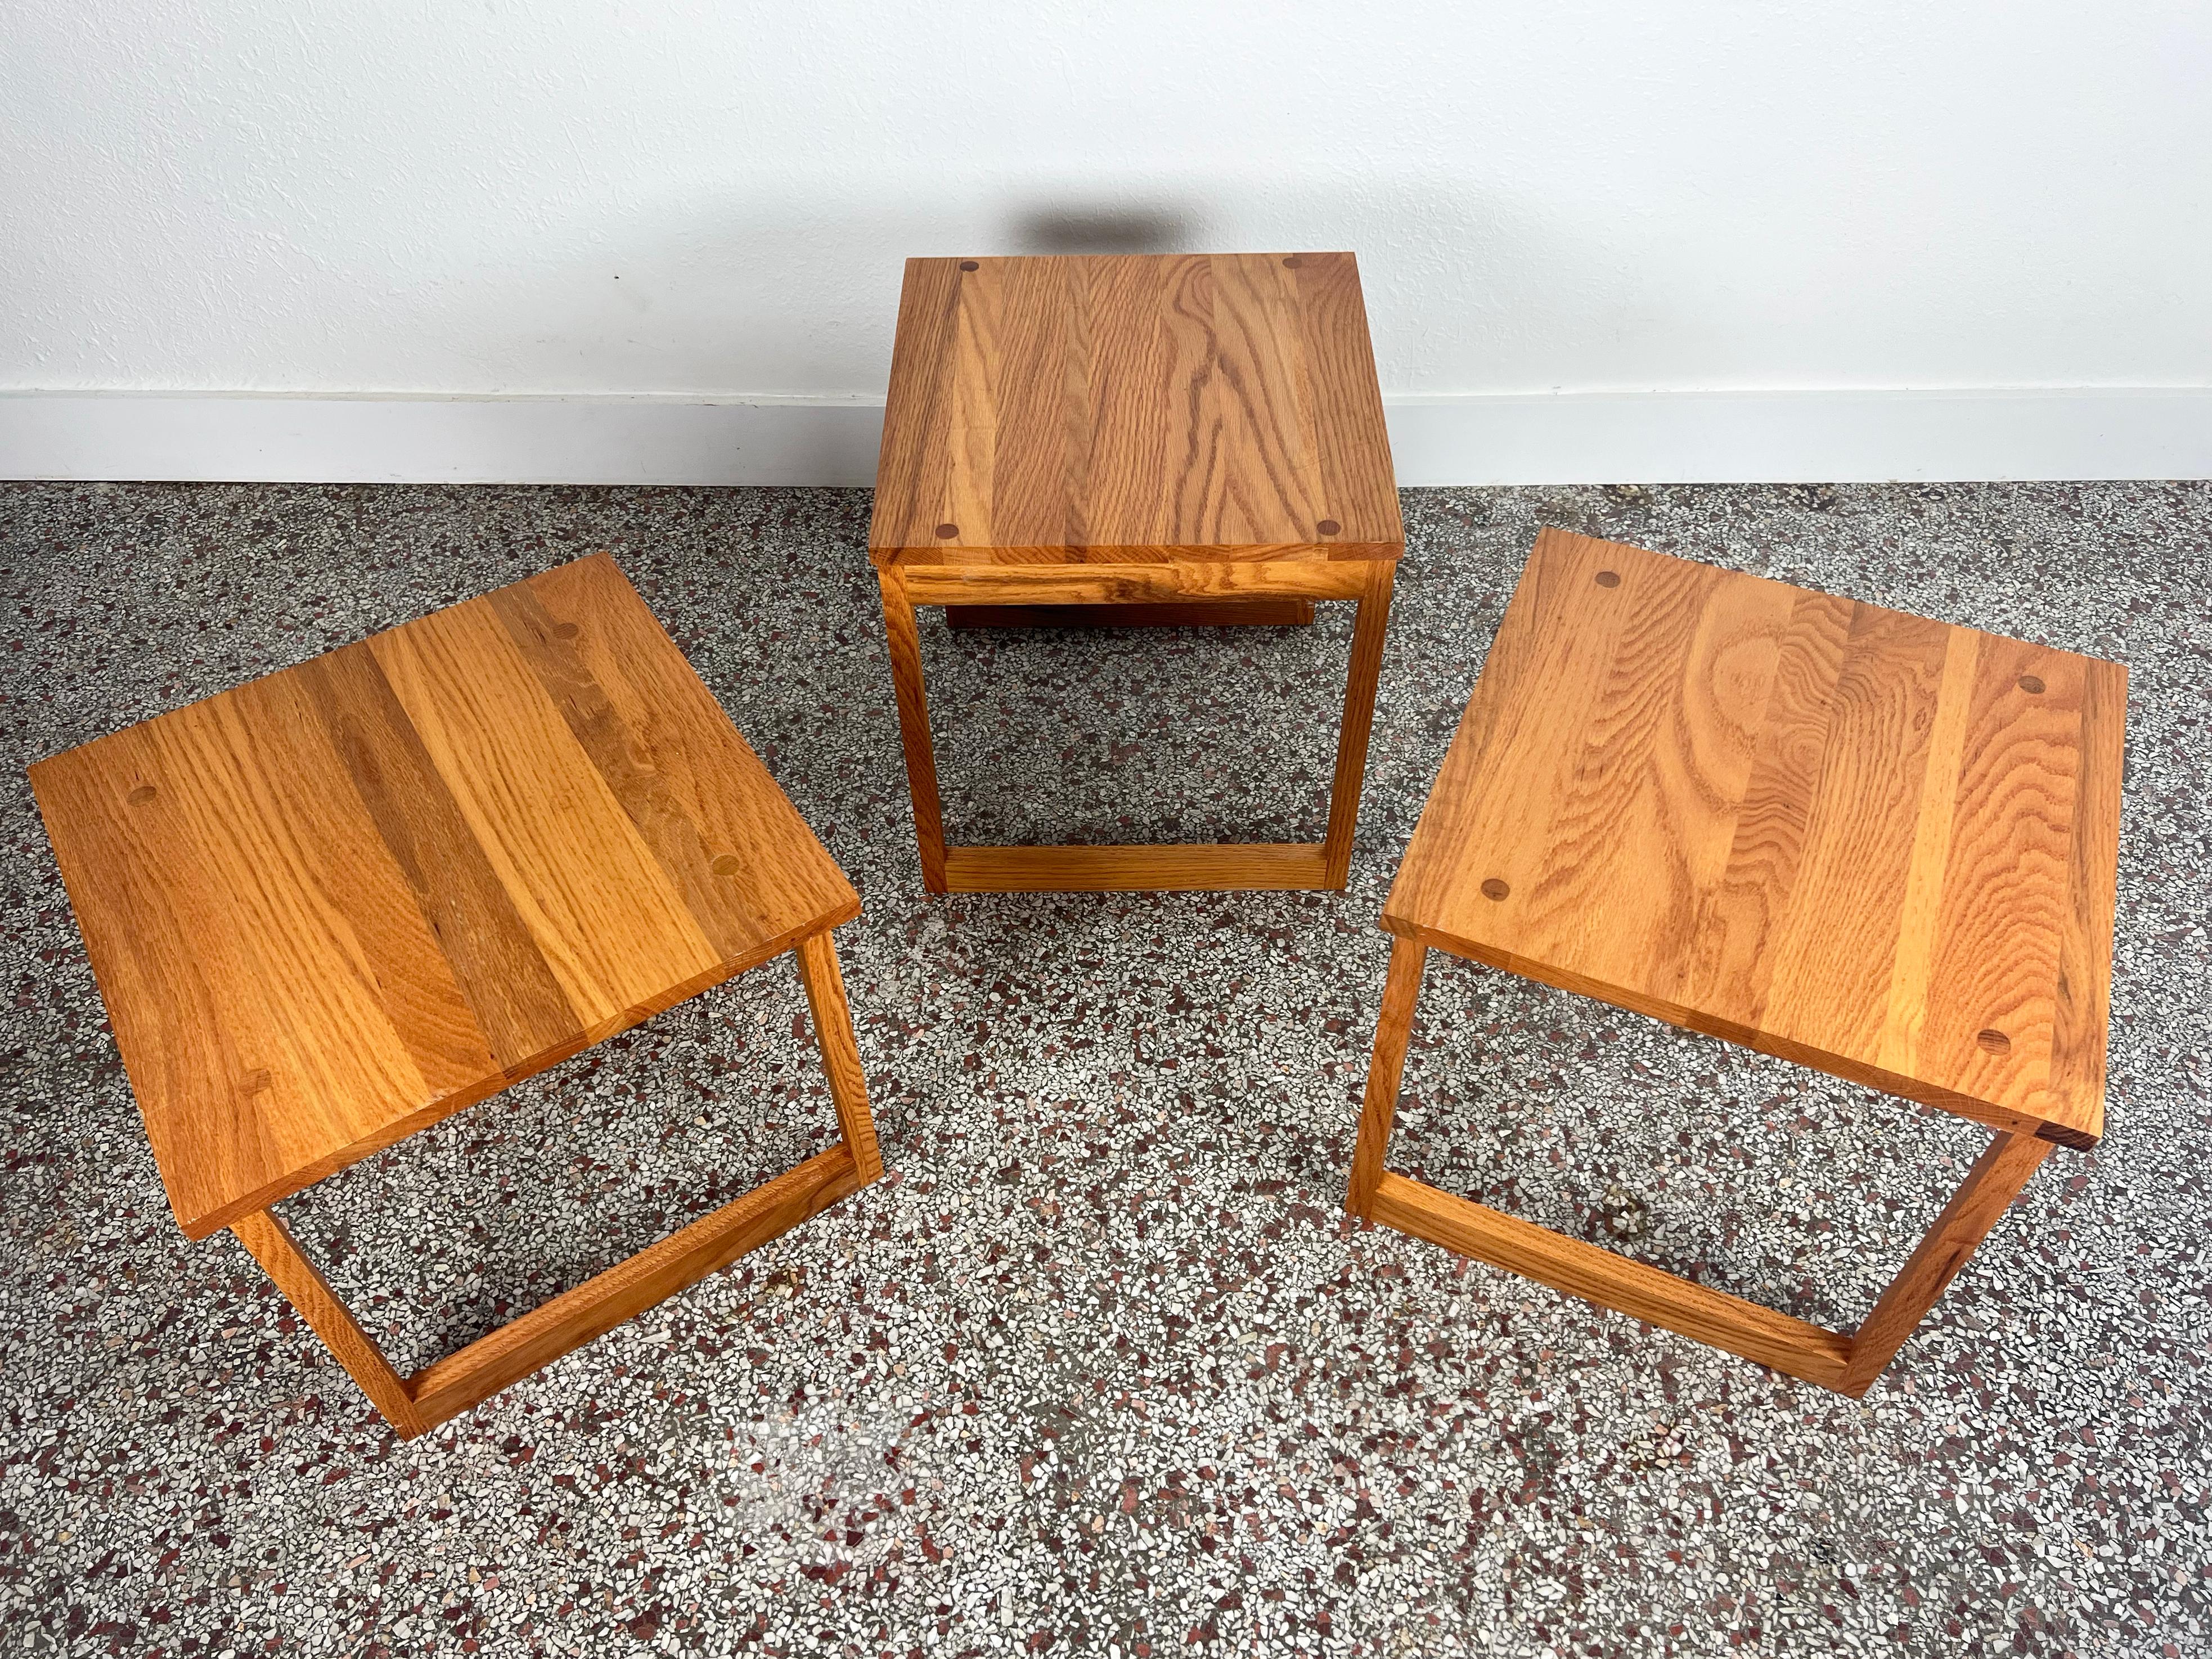  Vintage Studio Crafted Solid Oak Cube of Nesting Tables For Sale 3